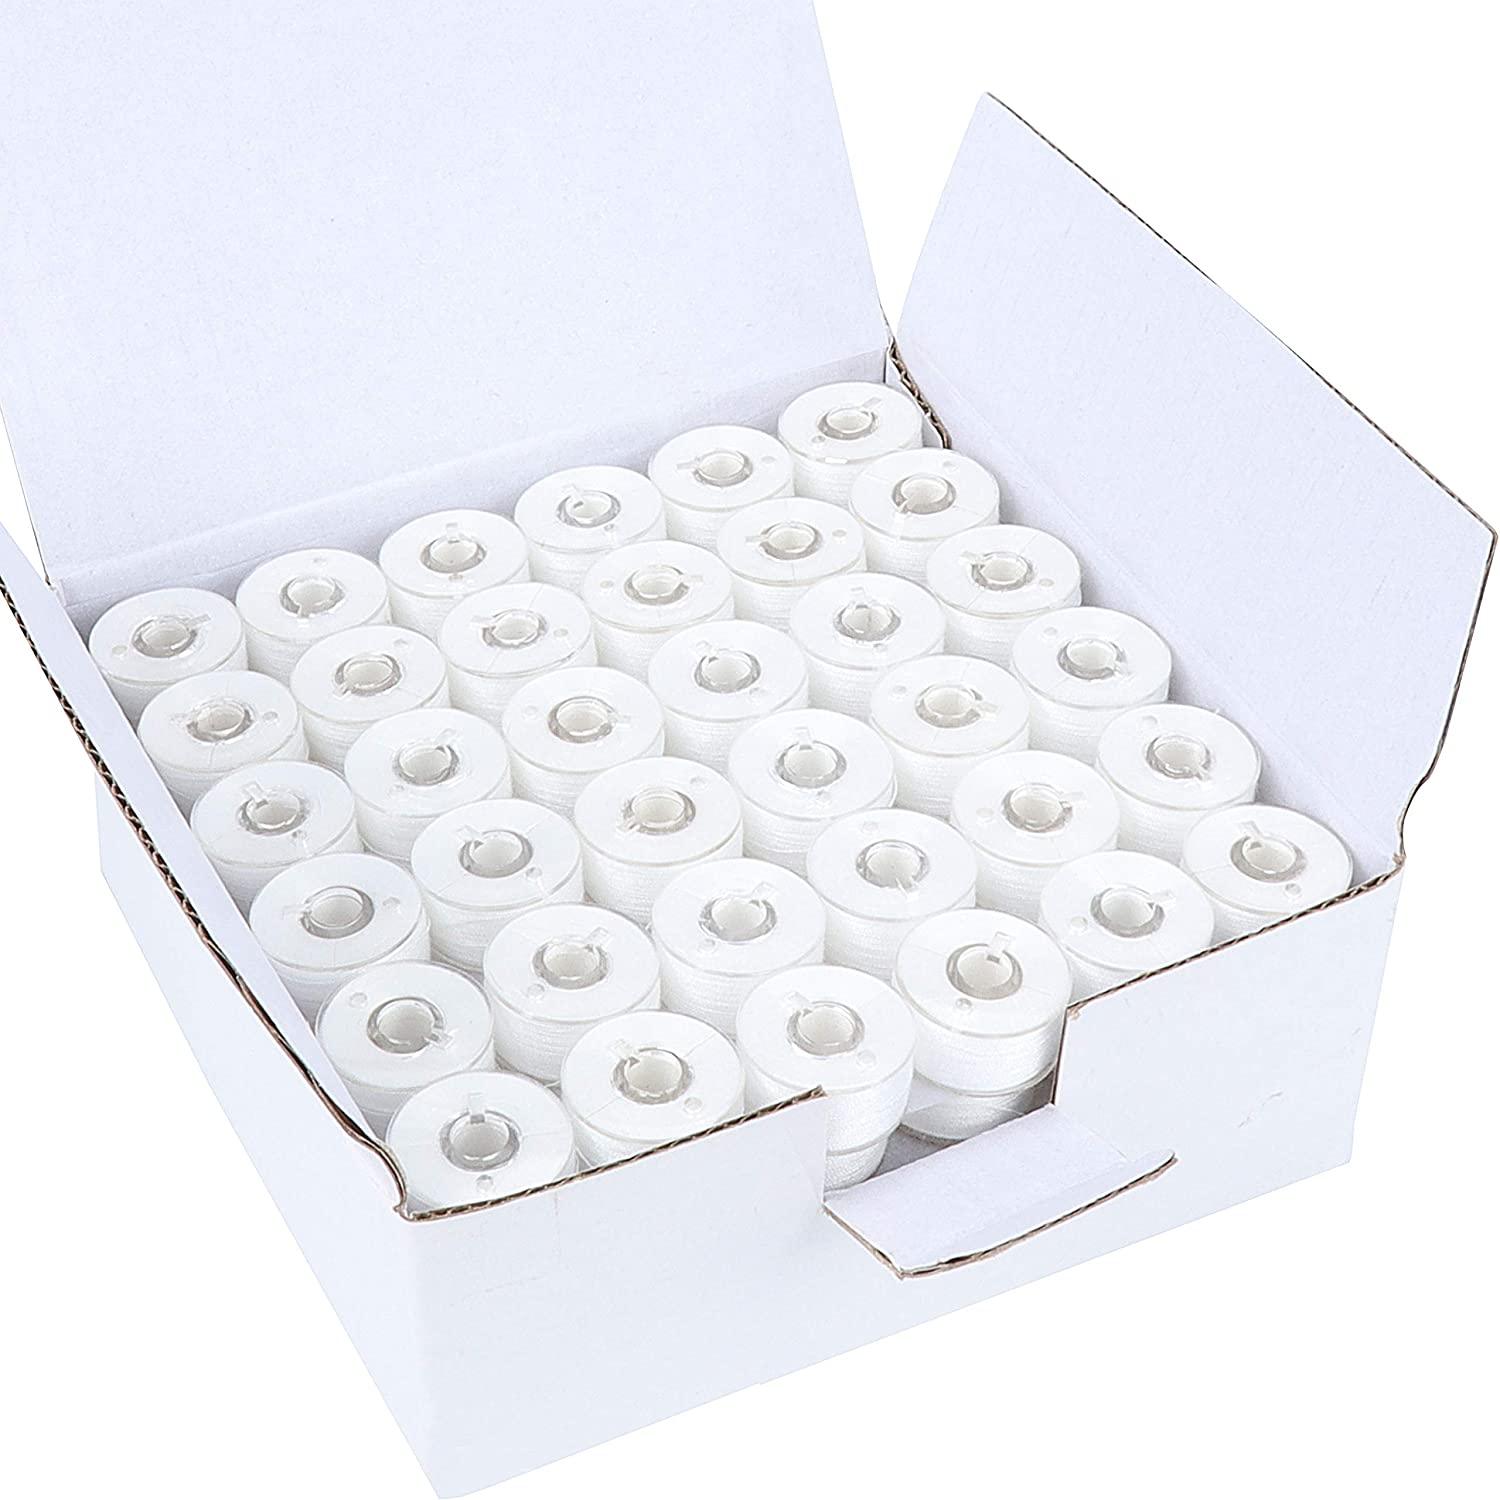 New brothread 144pcs Type L (SA155) Size White Prewound Bobbin Thread  Plastic Side for Particular Embroidery and Sewing Machines - 90 Weight  Cottonized Soft Feel Polyester Sewing Thread